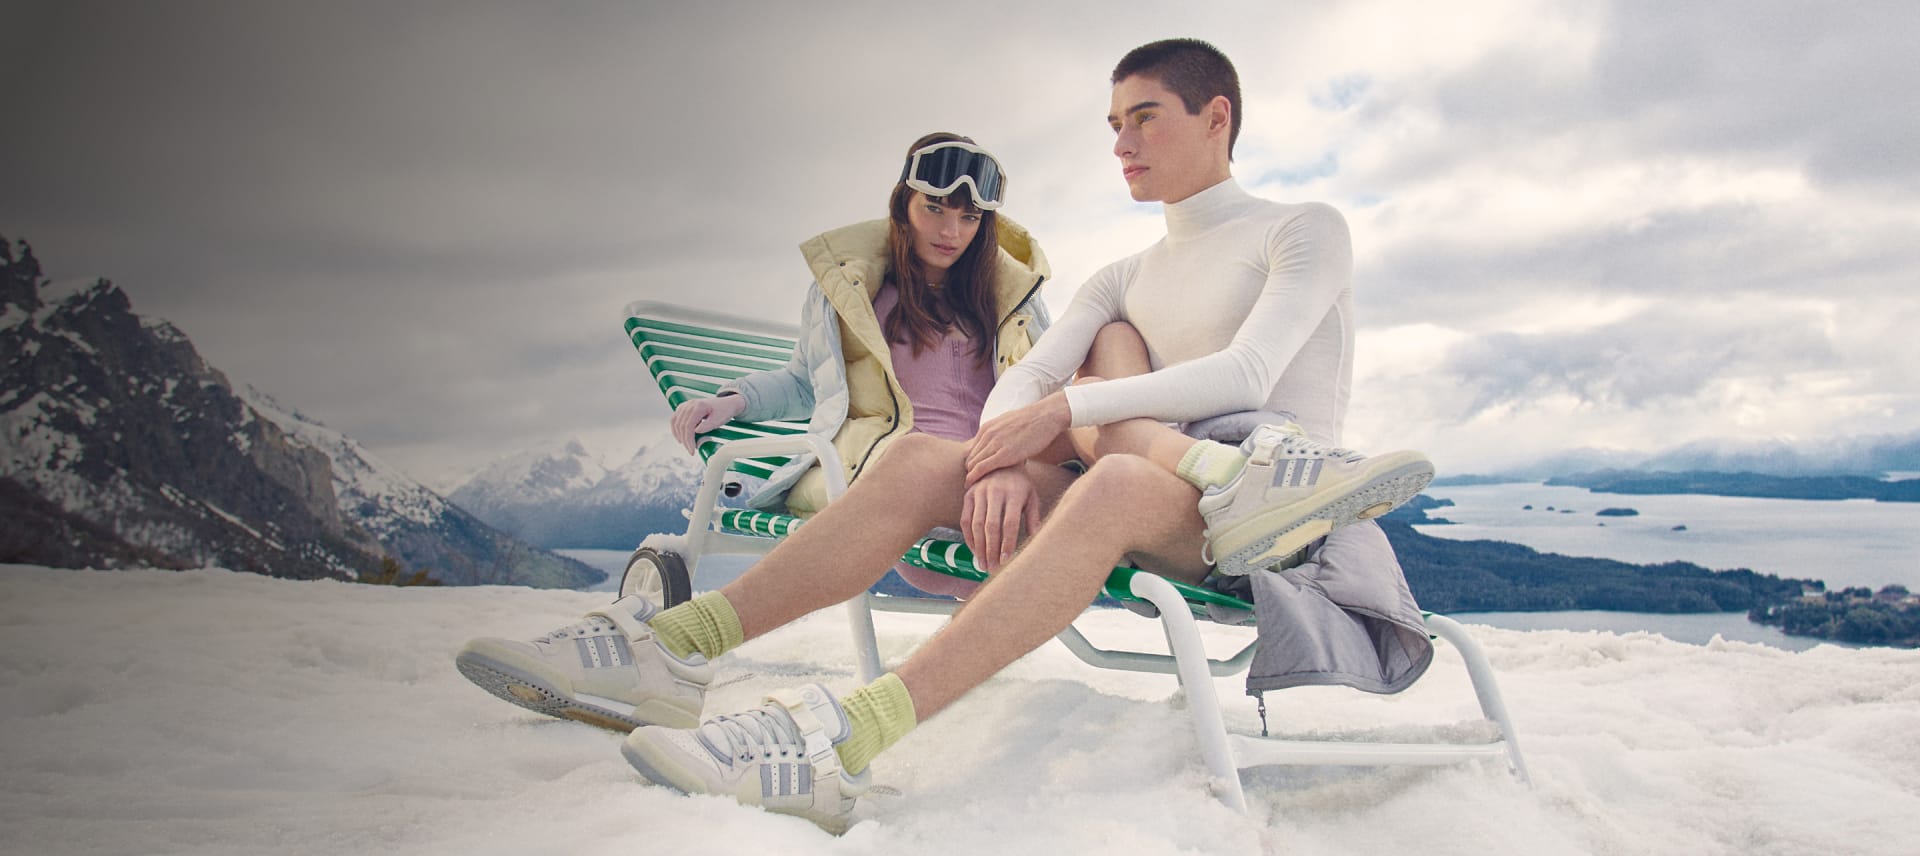 Two models in the snow wearing the Bad Bunny White Forums.